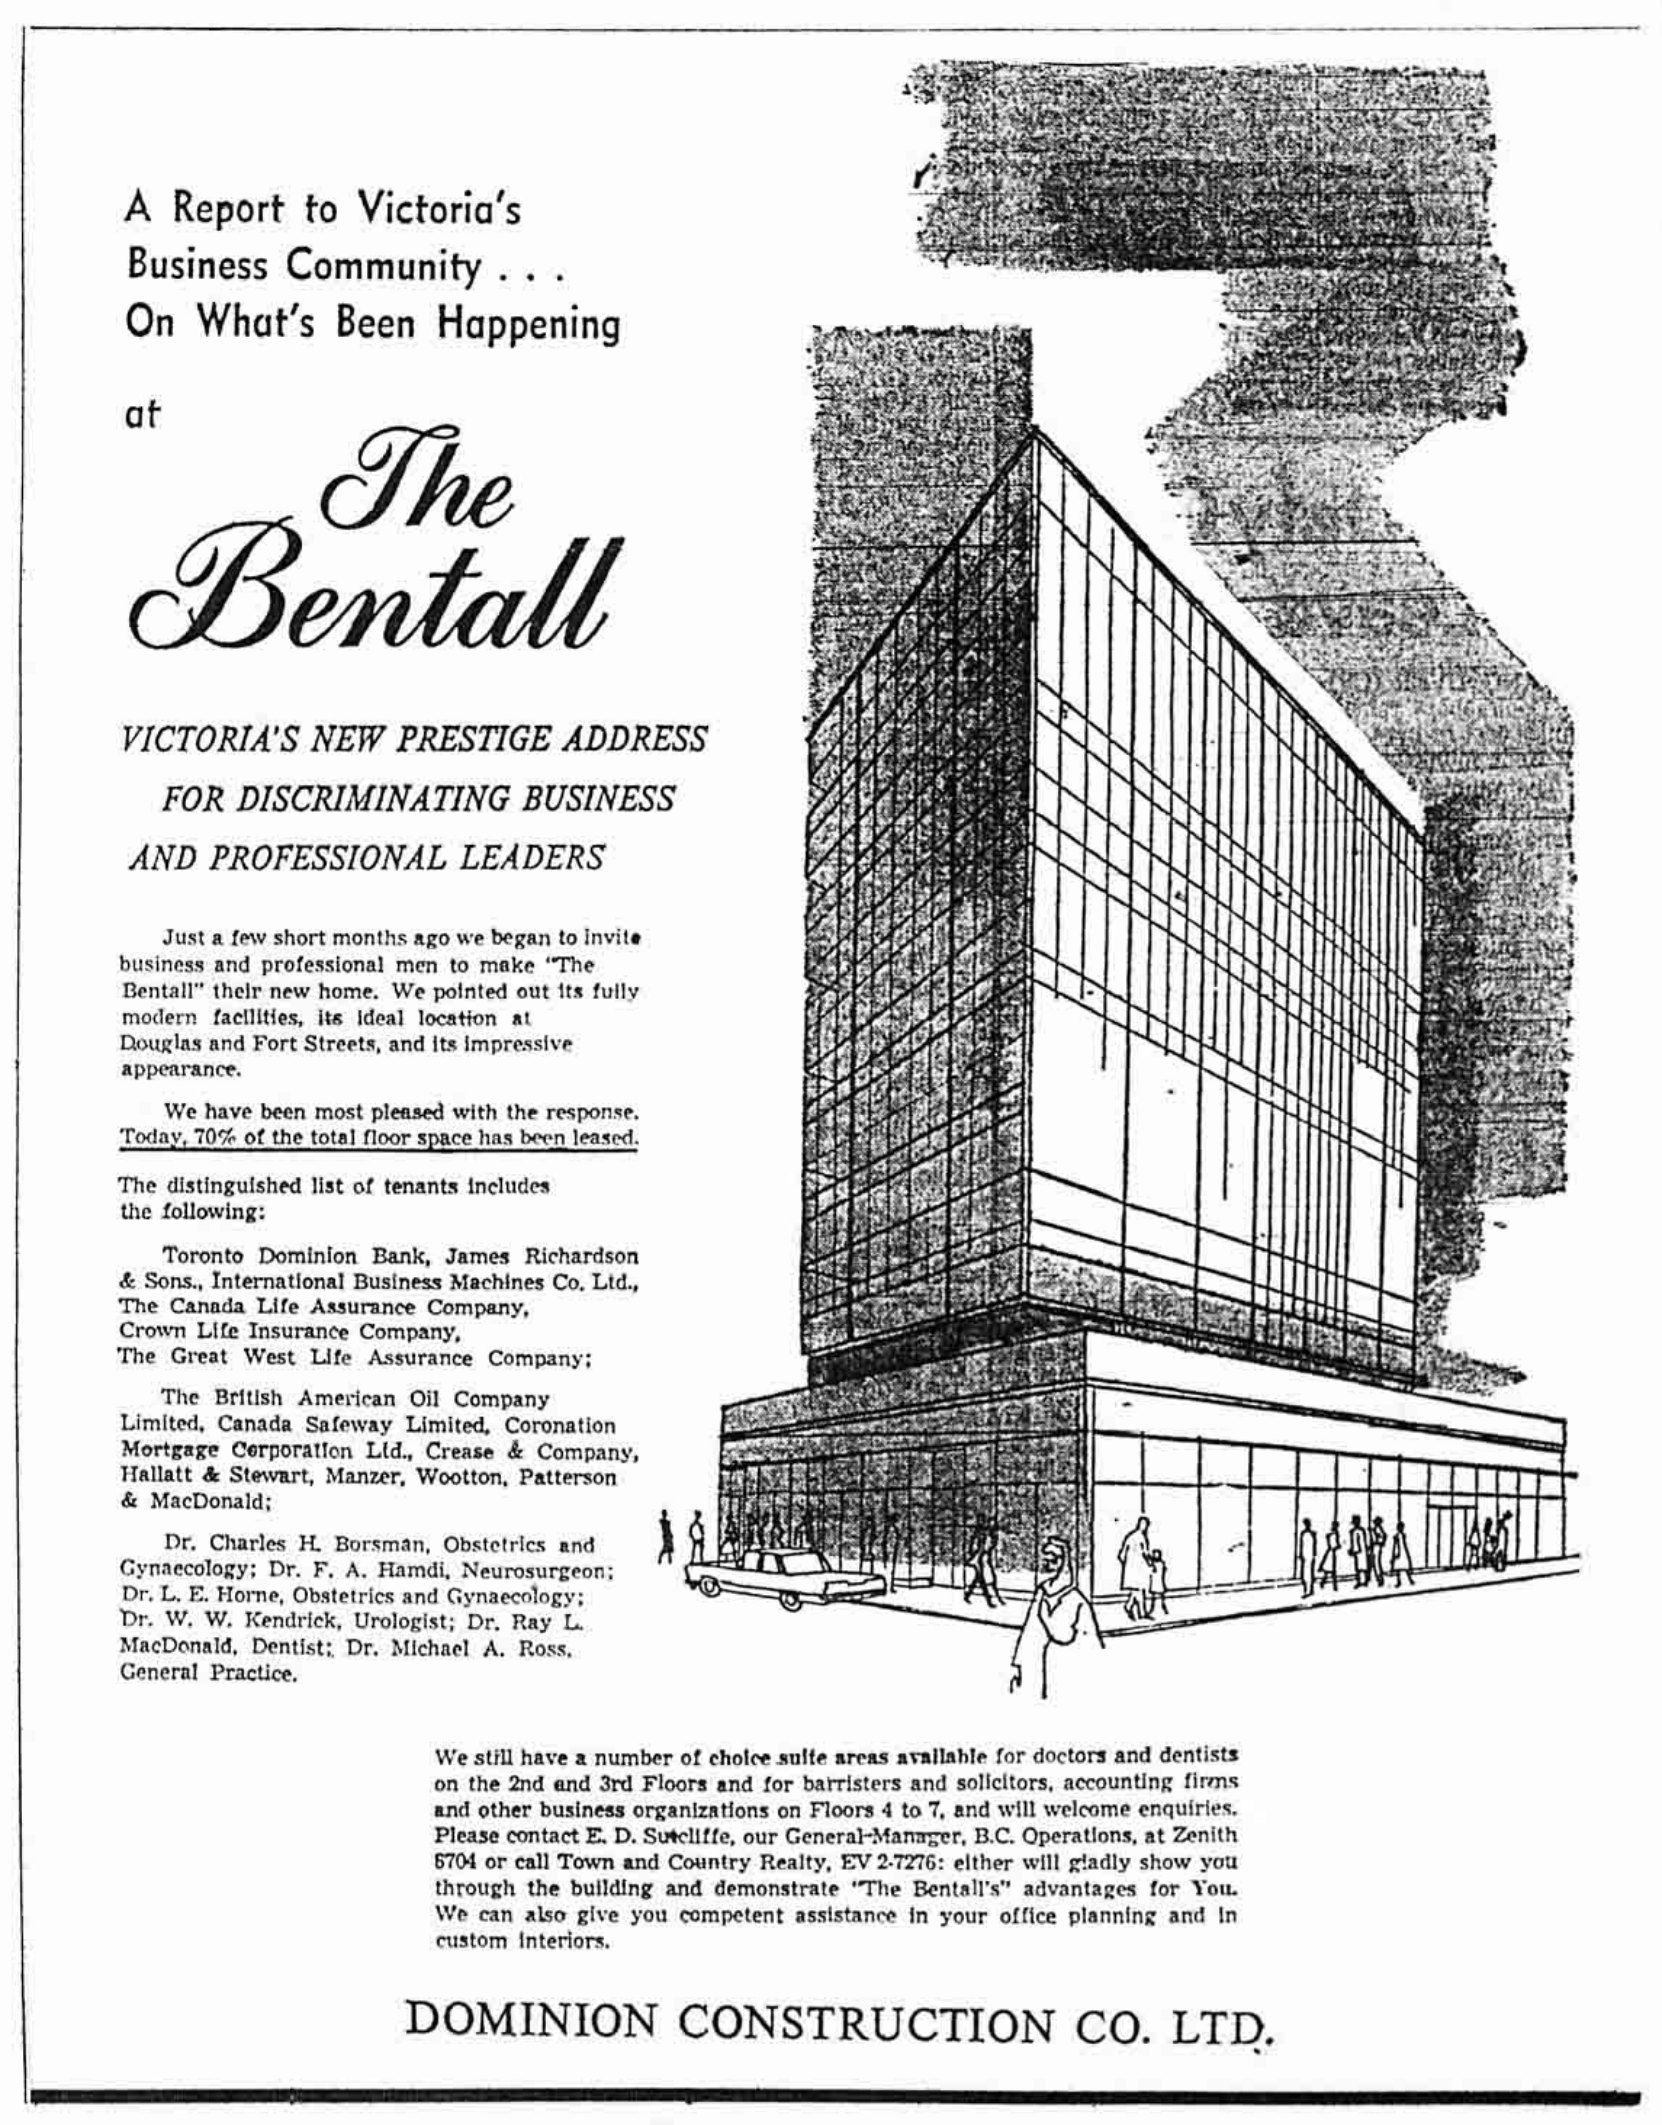 1964 advertisement for the Bentall Building at 1060 Douglas Street. The Bentall Building is now in the Canadian Register of Historic Places.